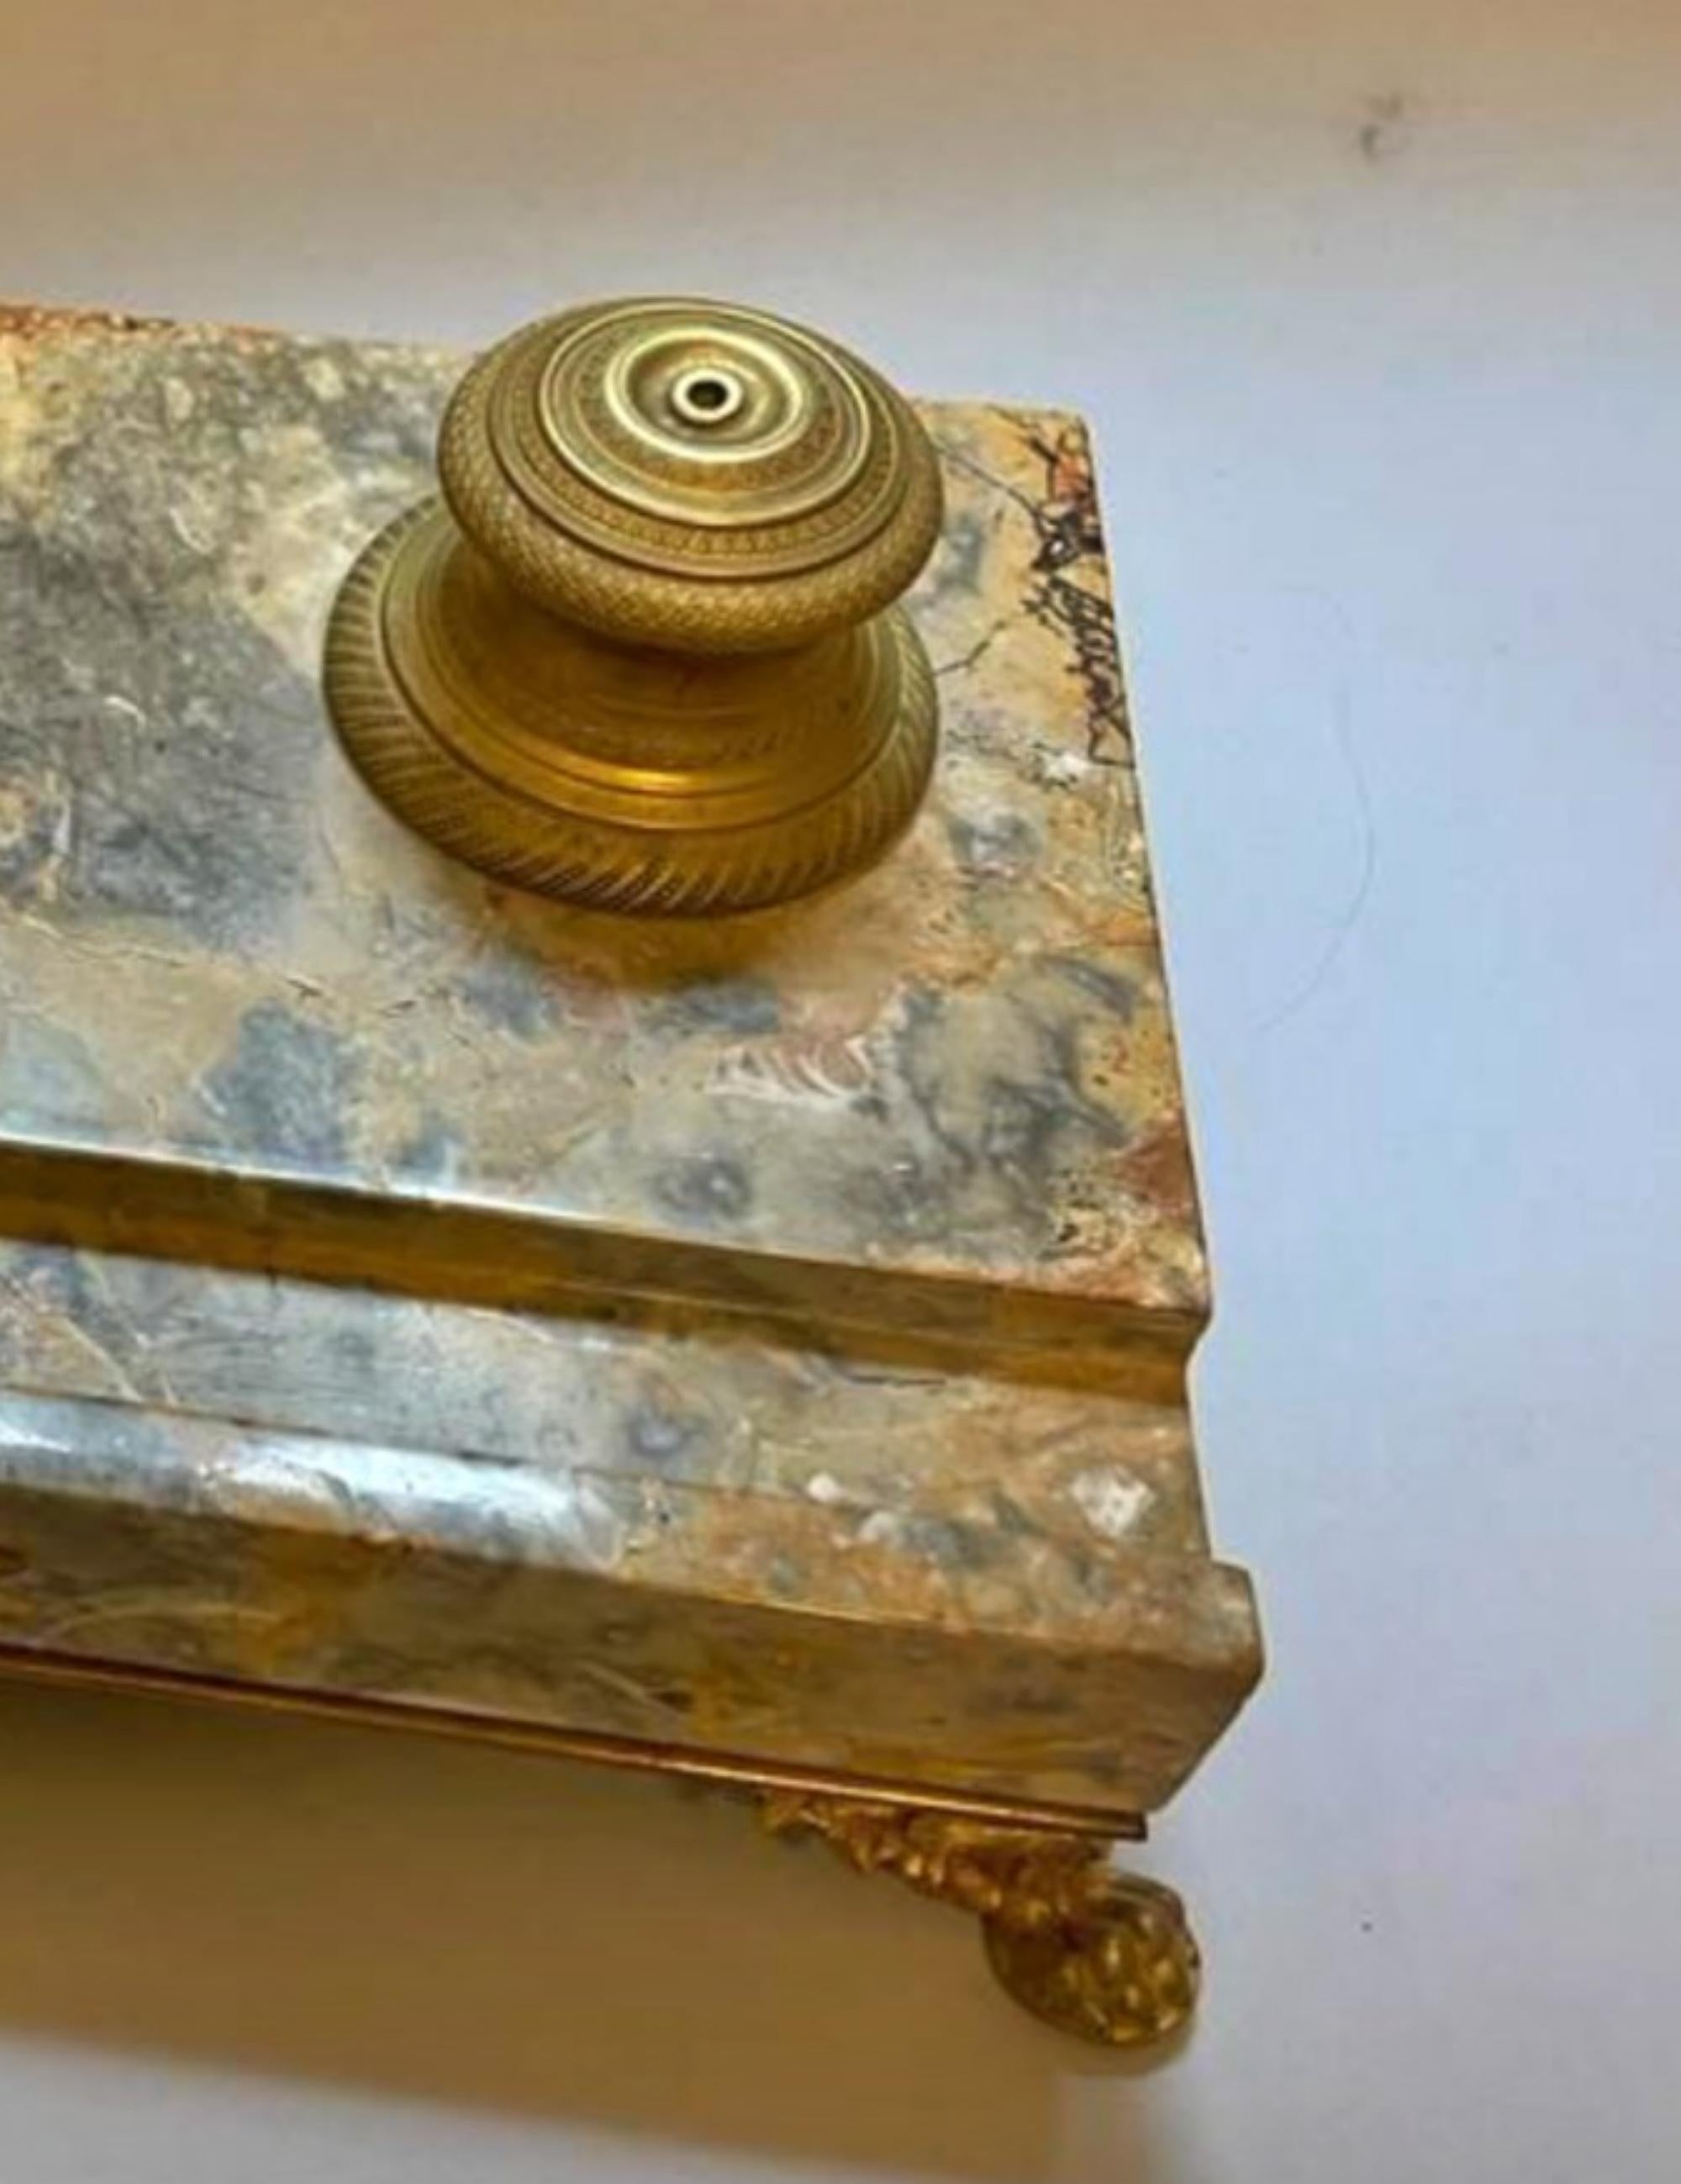 Office inkwell in Siena yellow marble and bronze Napoleon III 19th century
34cm x 20cm
Very good condition.